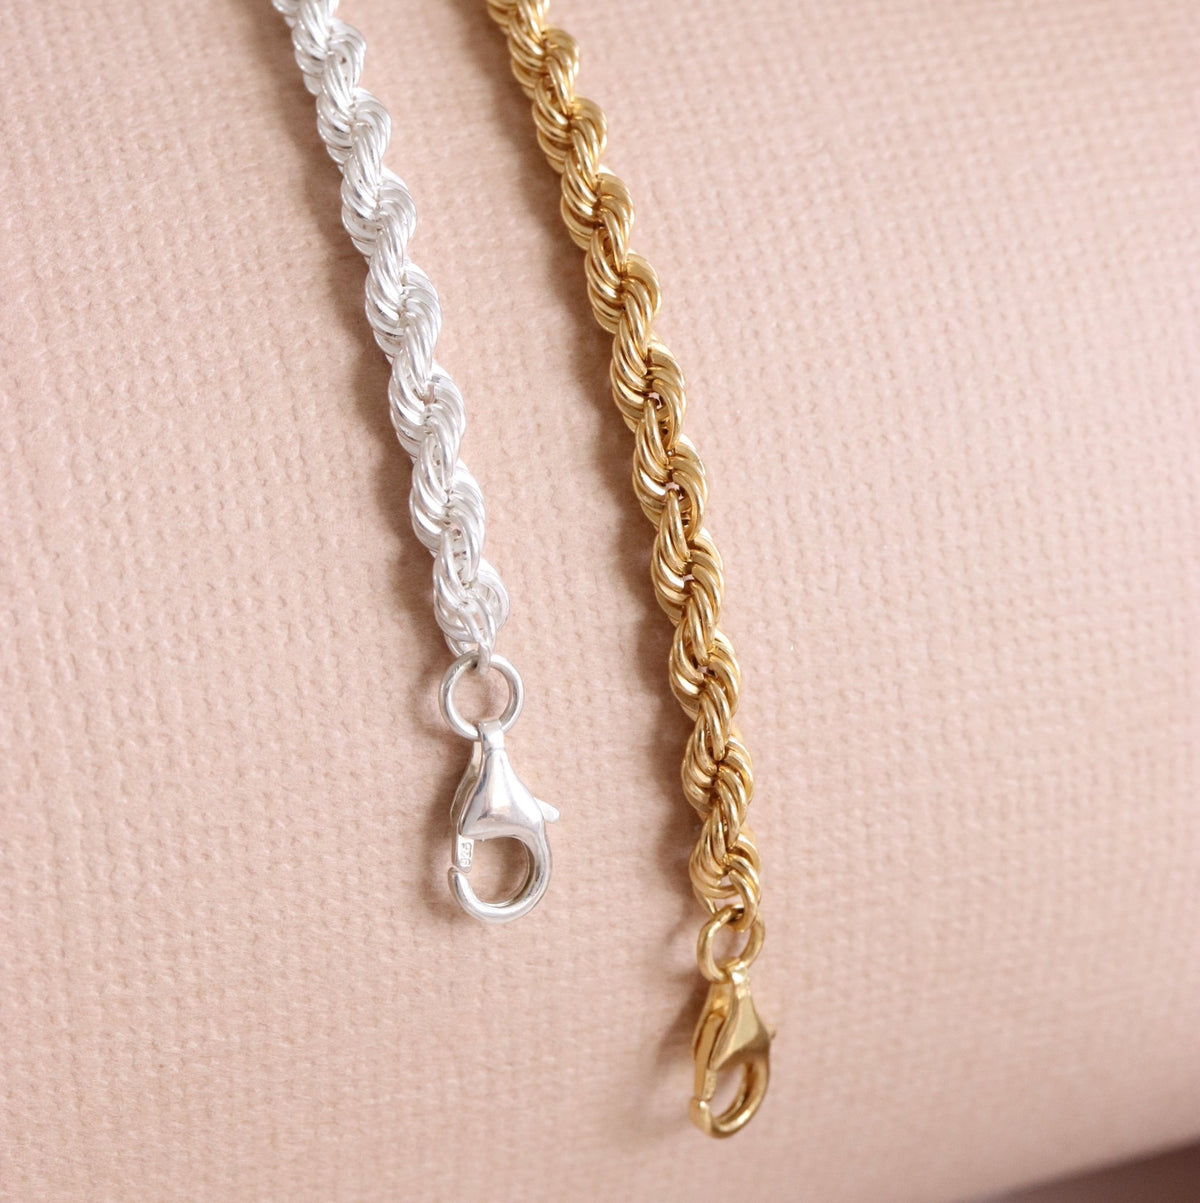 POISE TWISTED ROPE CHAIN BRACELET SILVER - SO PRETTY CARA COTTER